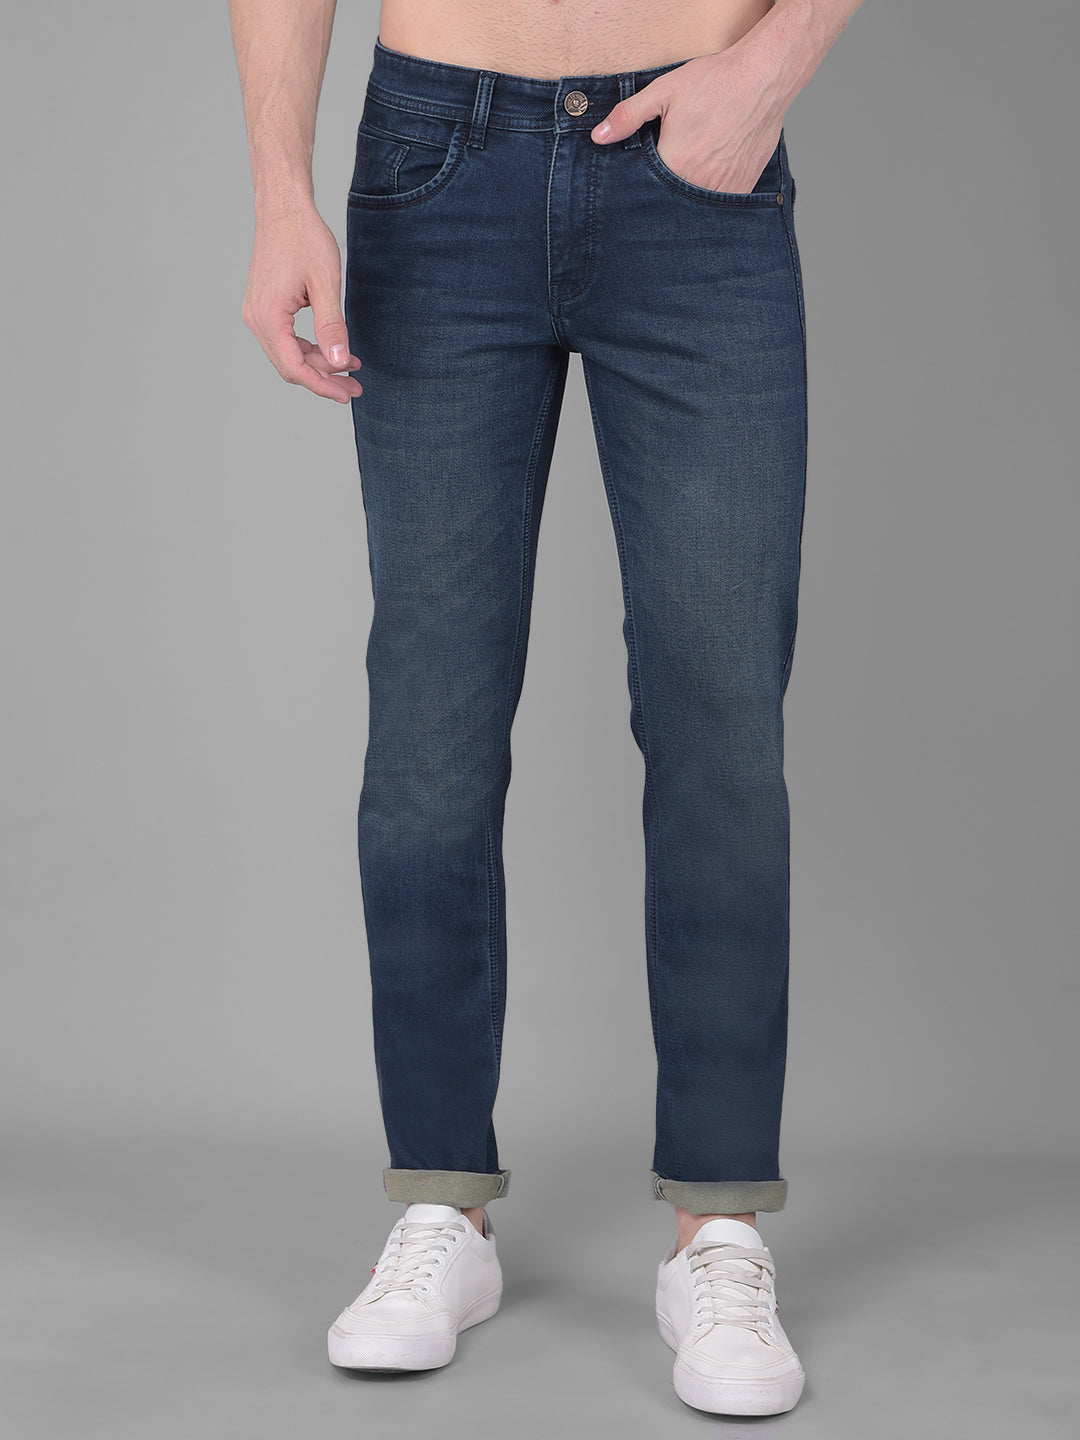 Faded Men Ankle Length Jeans, Blue at Rs 599/piece in New Delhi